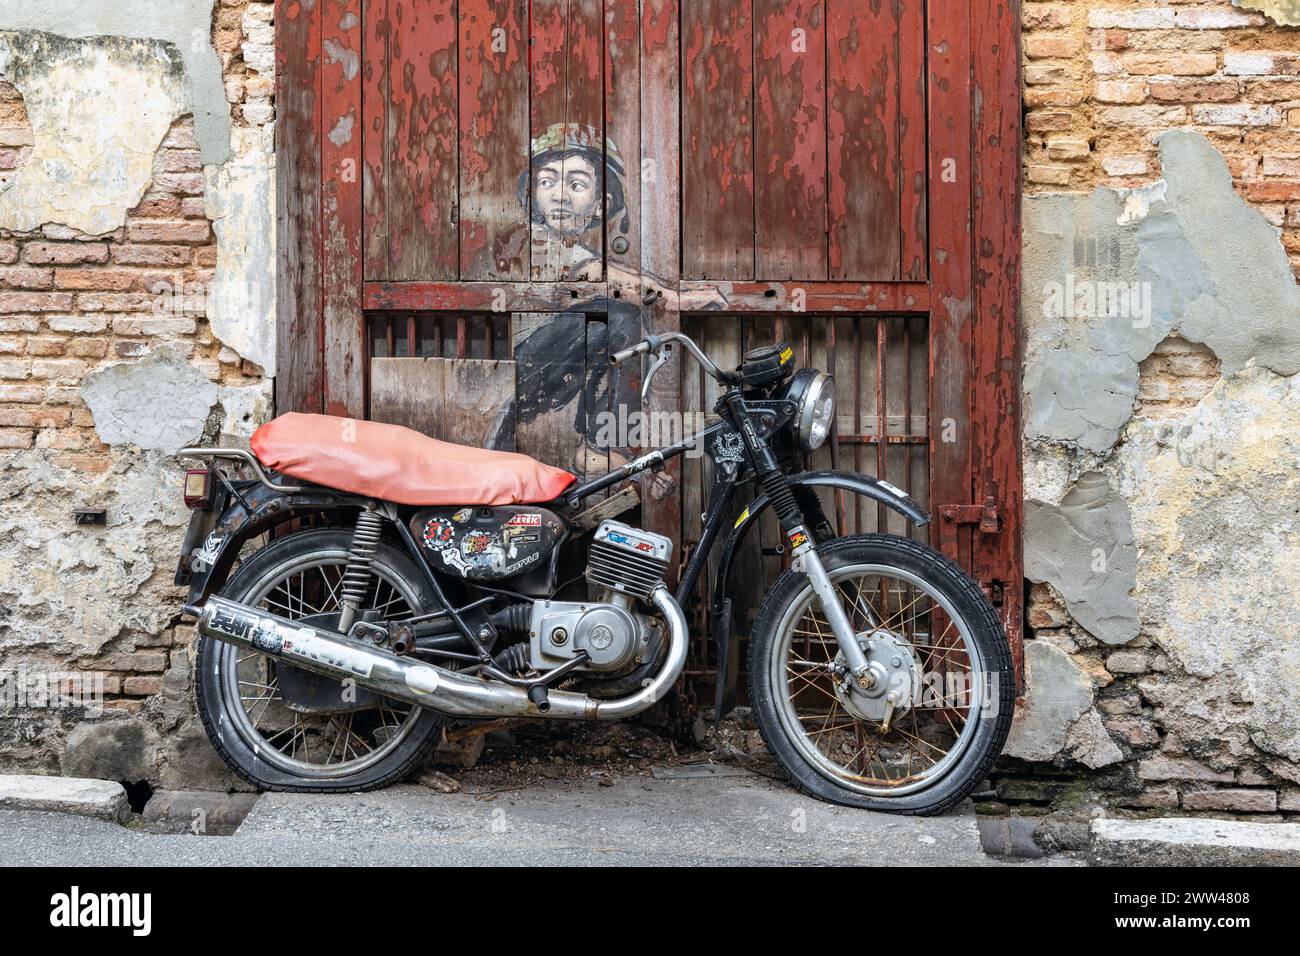 Boy on Motorbike street art mural by Lithuanian artist Ernest Zacharevic in George Town, Penang, Malaysia. Stock Photo